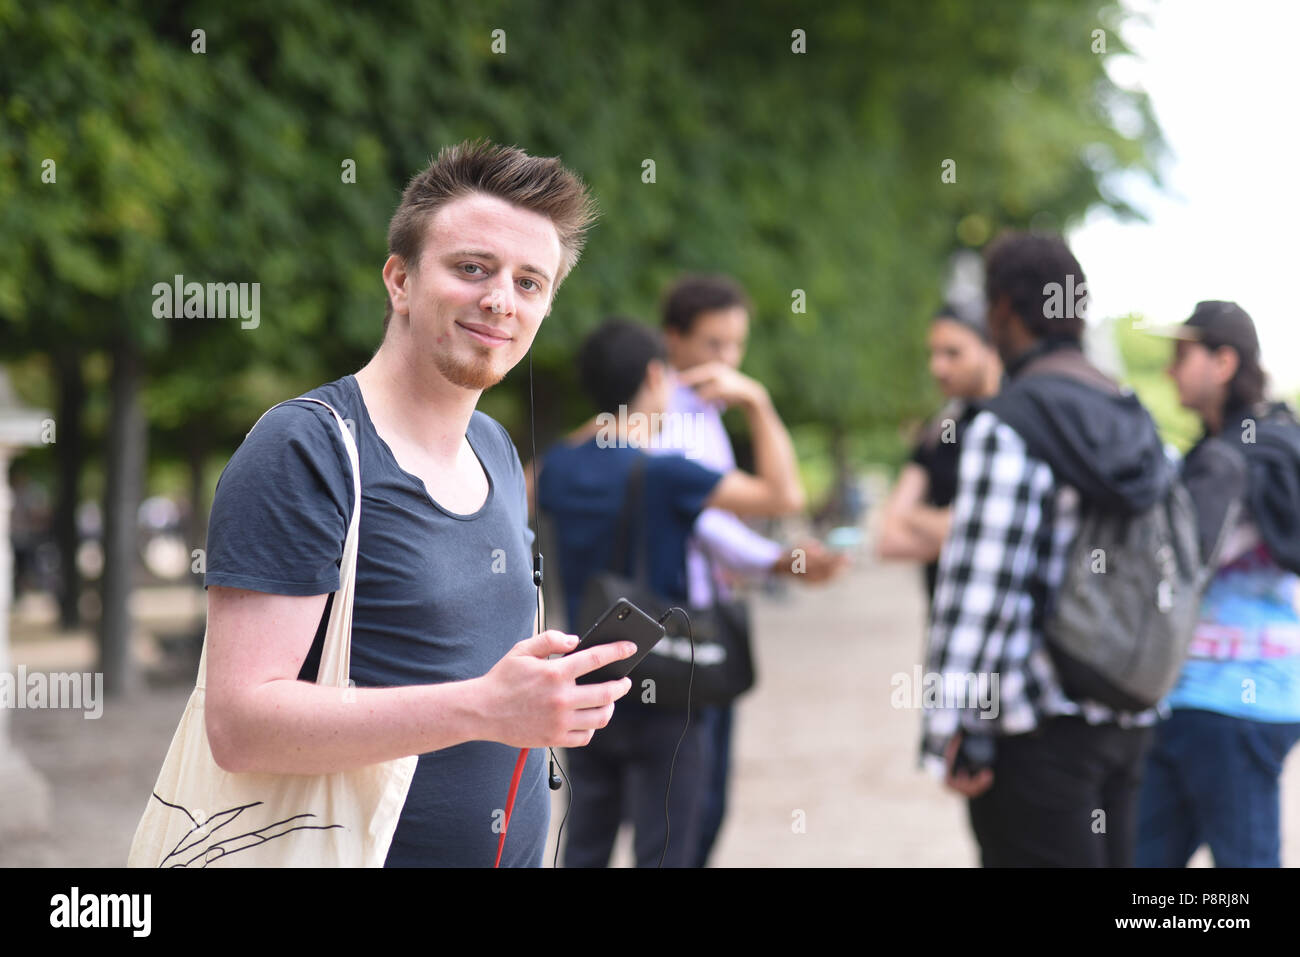 July 14, 2016 - Paris, France: Portrait of Raphael Candelaresi, one of the organizers of the mass Pokemon hunt in the Luxembourg Garden in central Paris. Hundreds of players of the new Pokemon Go game showed up to take part in a massive hunt despite the authorities' attempt to cancel the event. Despite playing mostly solo, the Pokemon Go users enjoyed to interact and meet other players. Millions of users have already downloaded the game, which requires users to catch on-screen pokemon characters using their real-world location. Des jeunes participent a une chasse au Pokemons dans le jardin du  Stock Photo